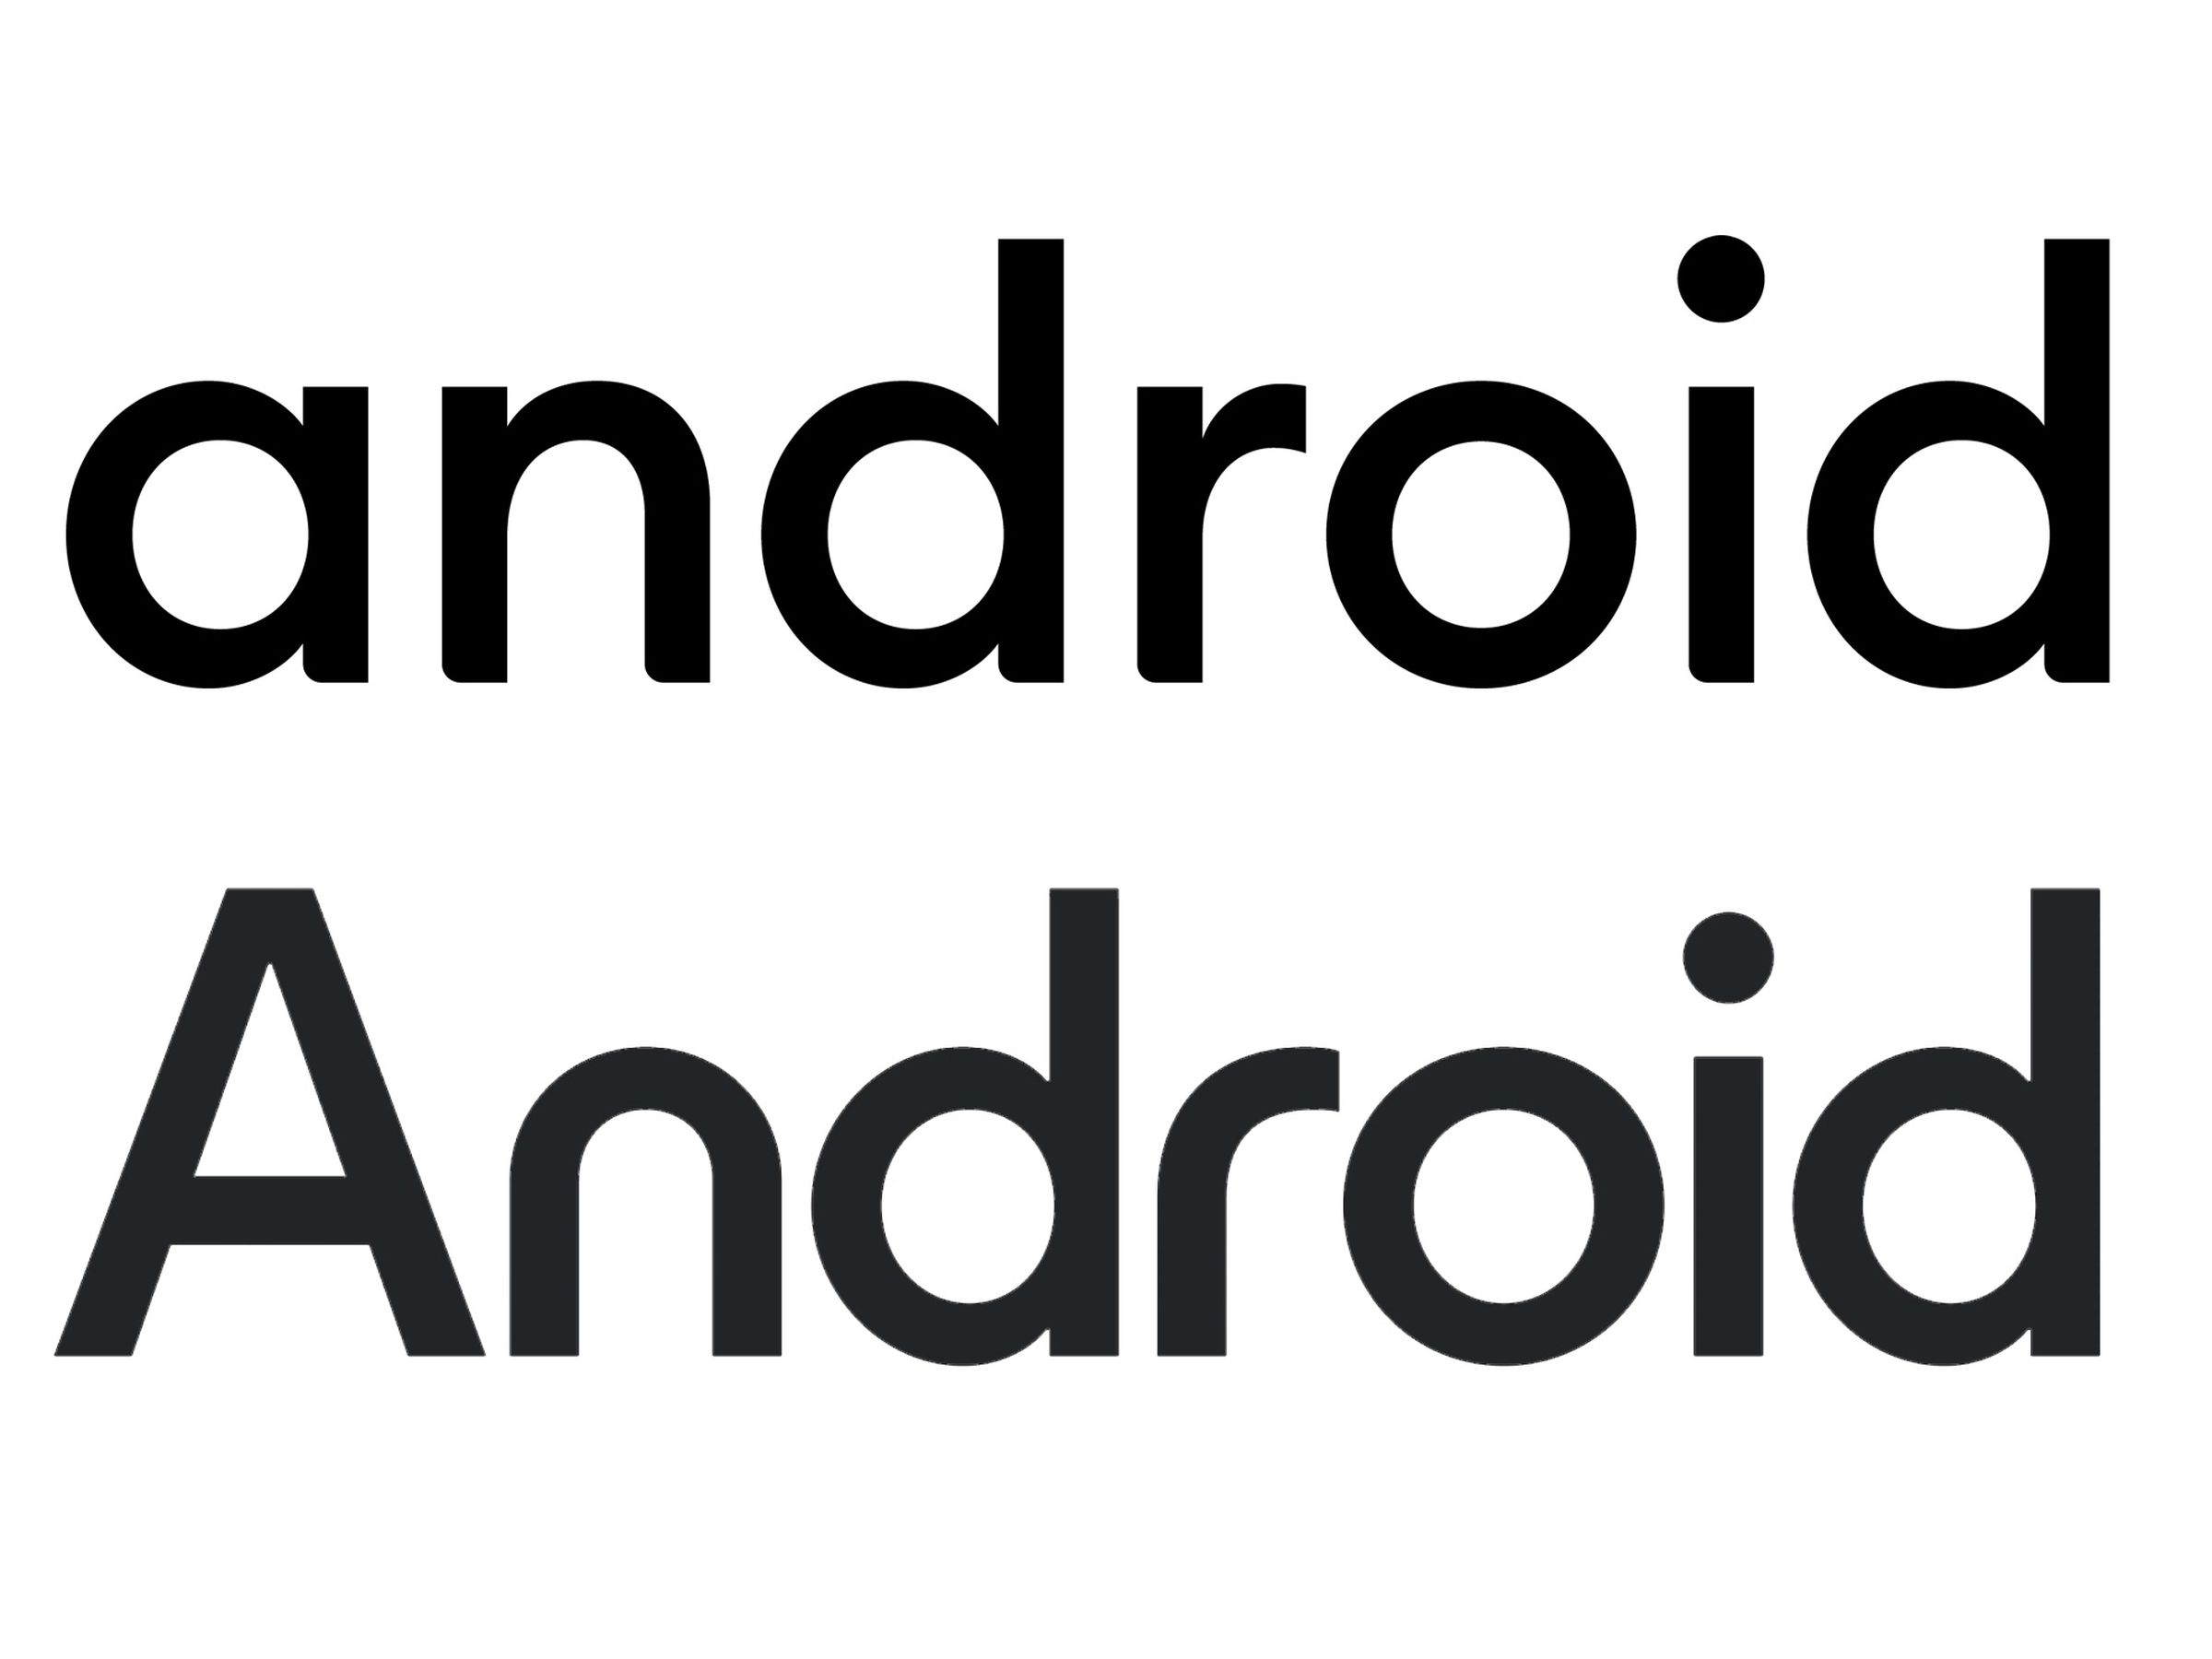 New Android logo compared to the old one showing capital letter A and updated font.